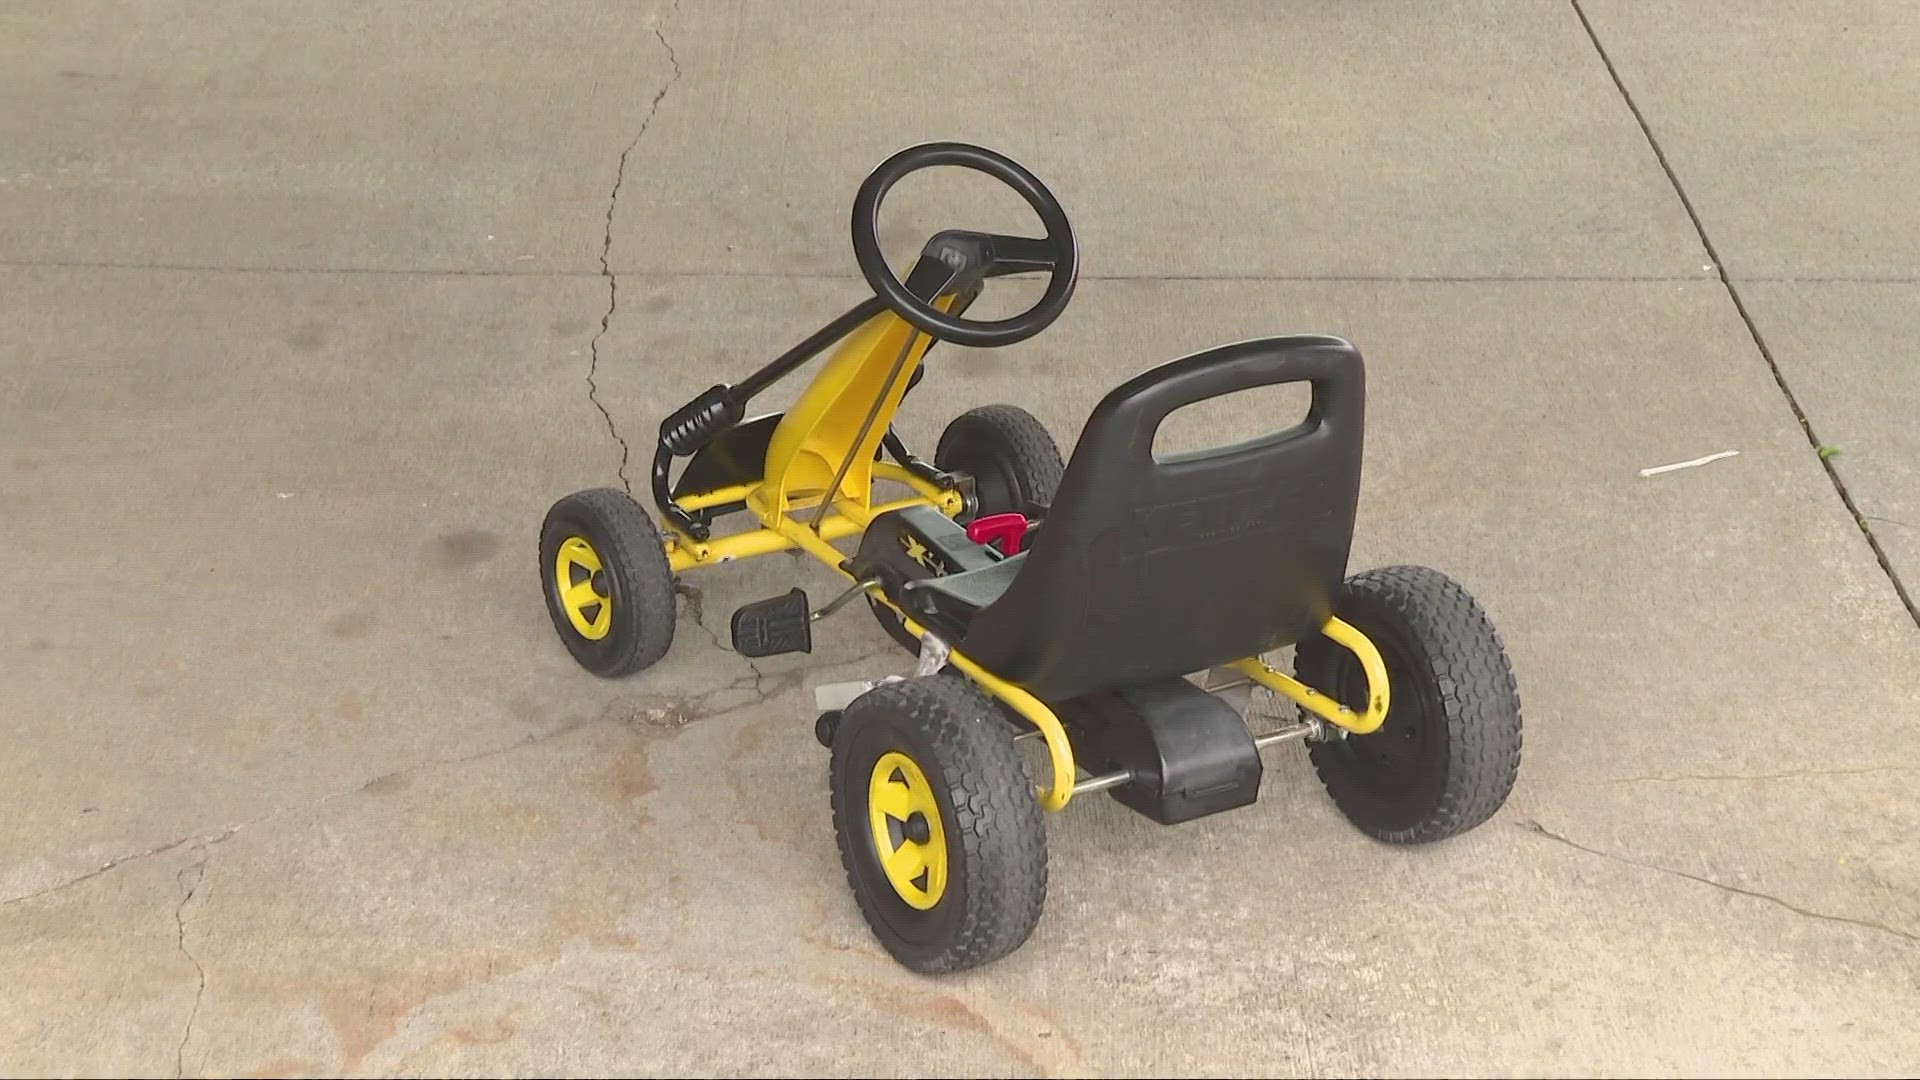 The pedal cars are worth about $150 each. They were recently spotted near the Wolf's Cove Apartment Complex on Solon Rd, less than a mile from Bedford's Safety Town.